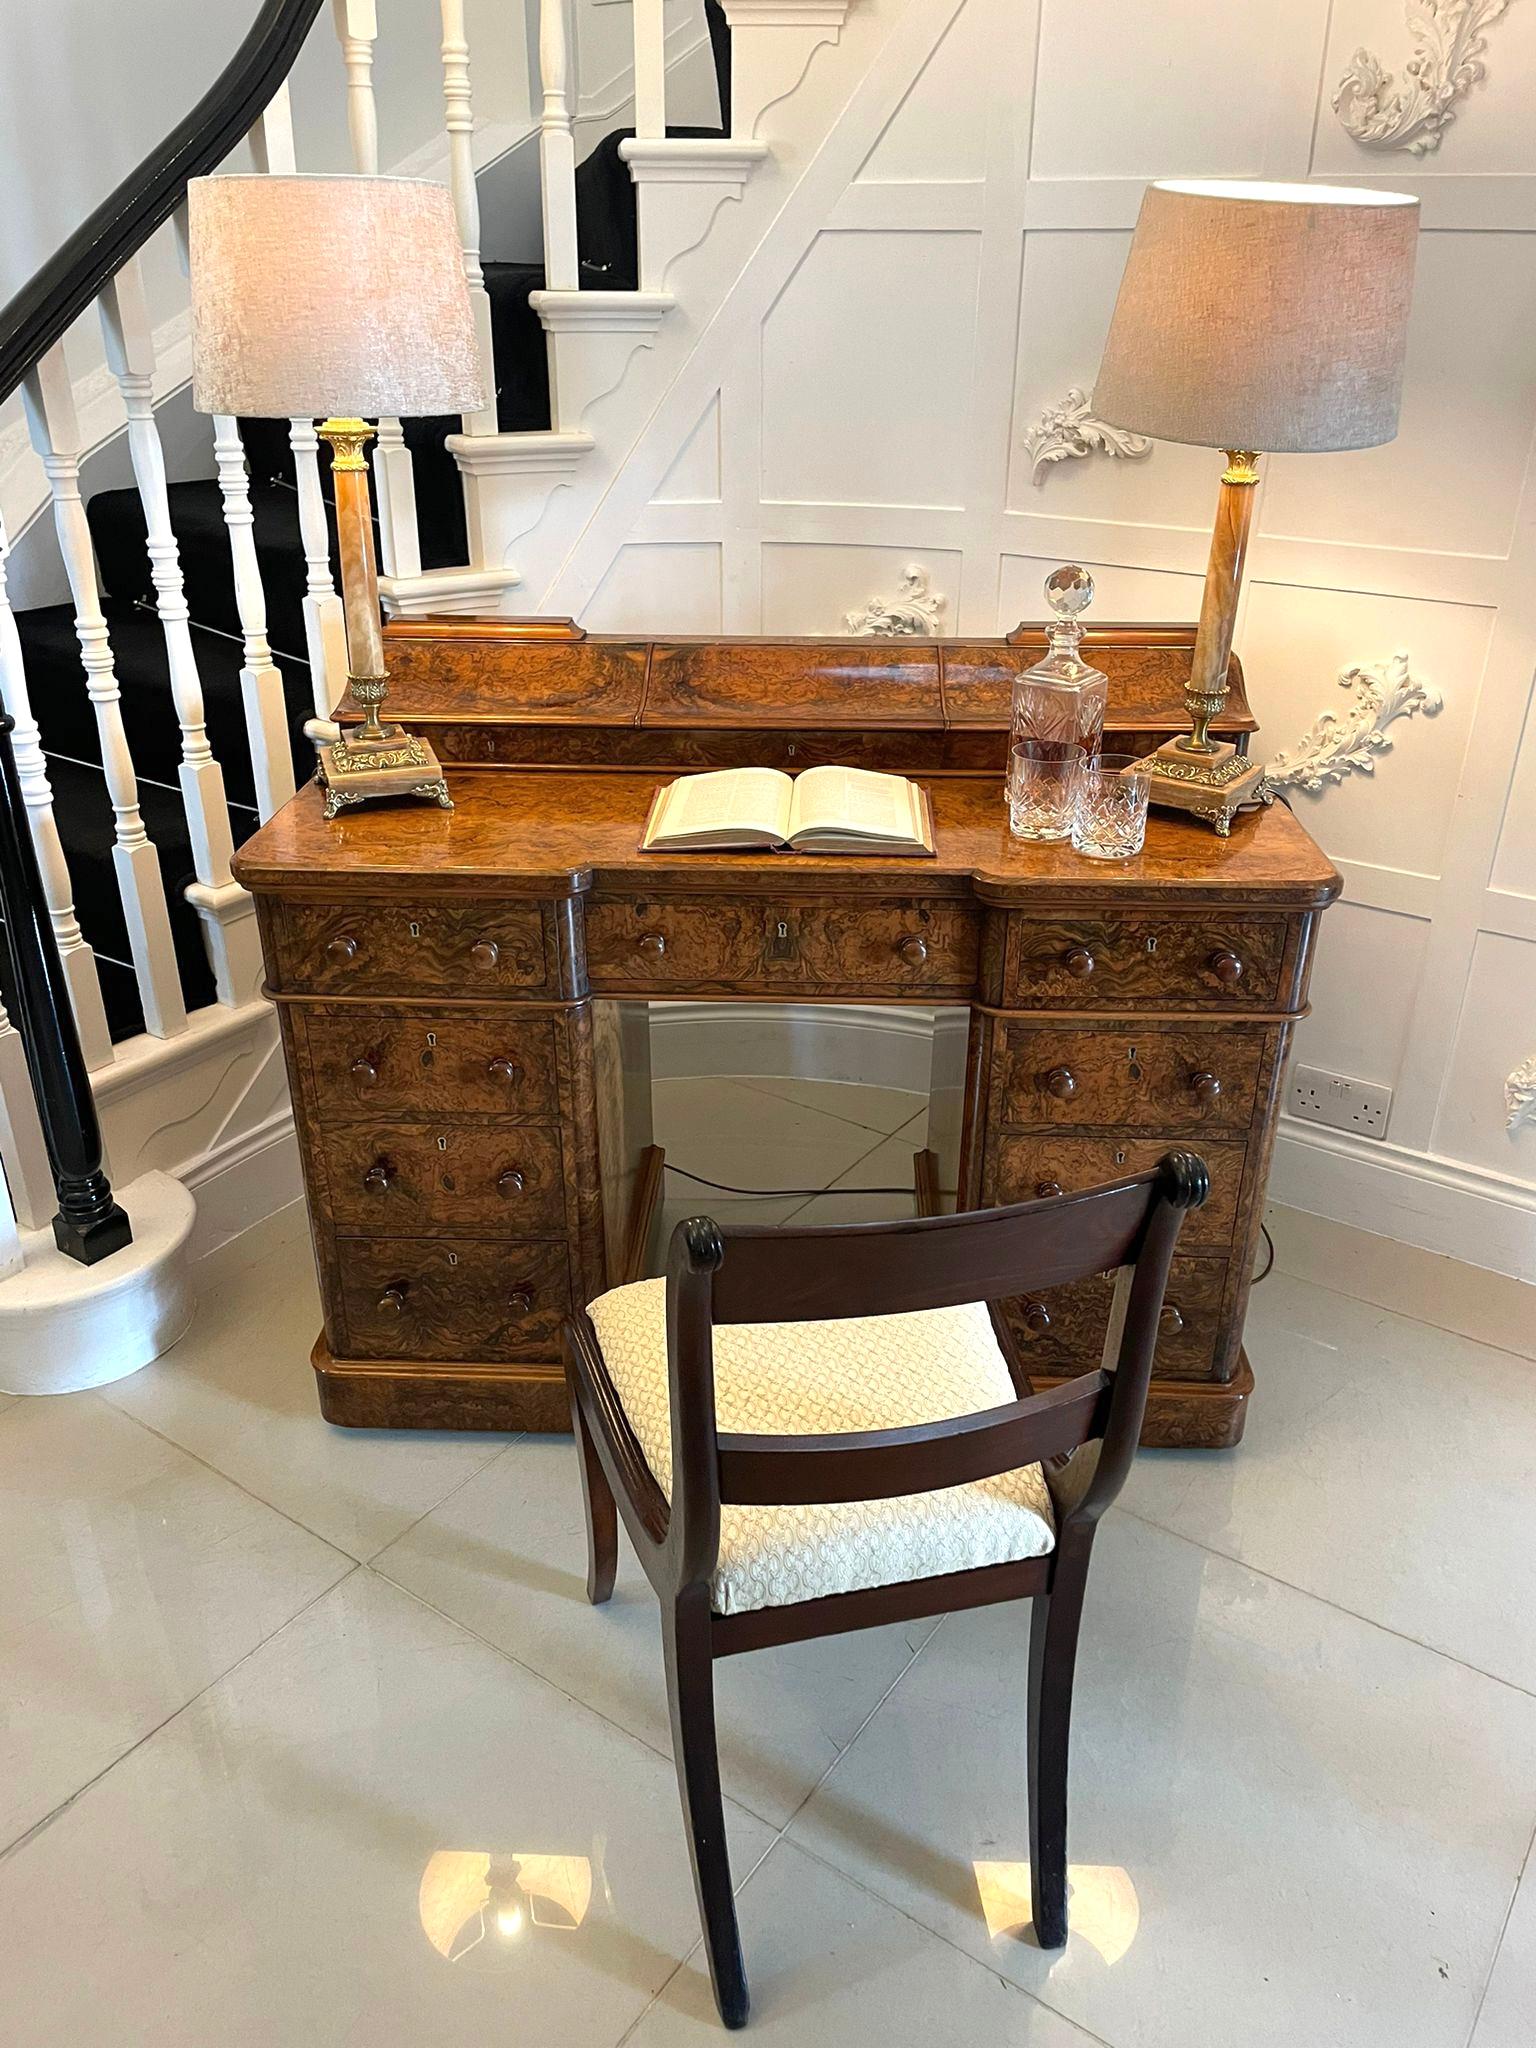 Outstanding quality antique Victorian burr walnut kneehole desk by Maple & Co. having a magnificent quality burr walnut top with three serpentine shaped lift up lids opening to reveal storage compartments above a kneehole desk with nine burr walnut